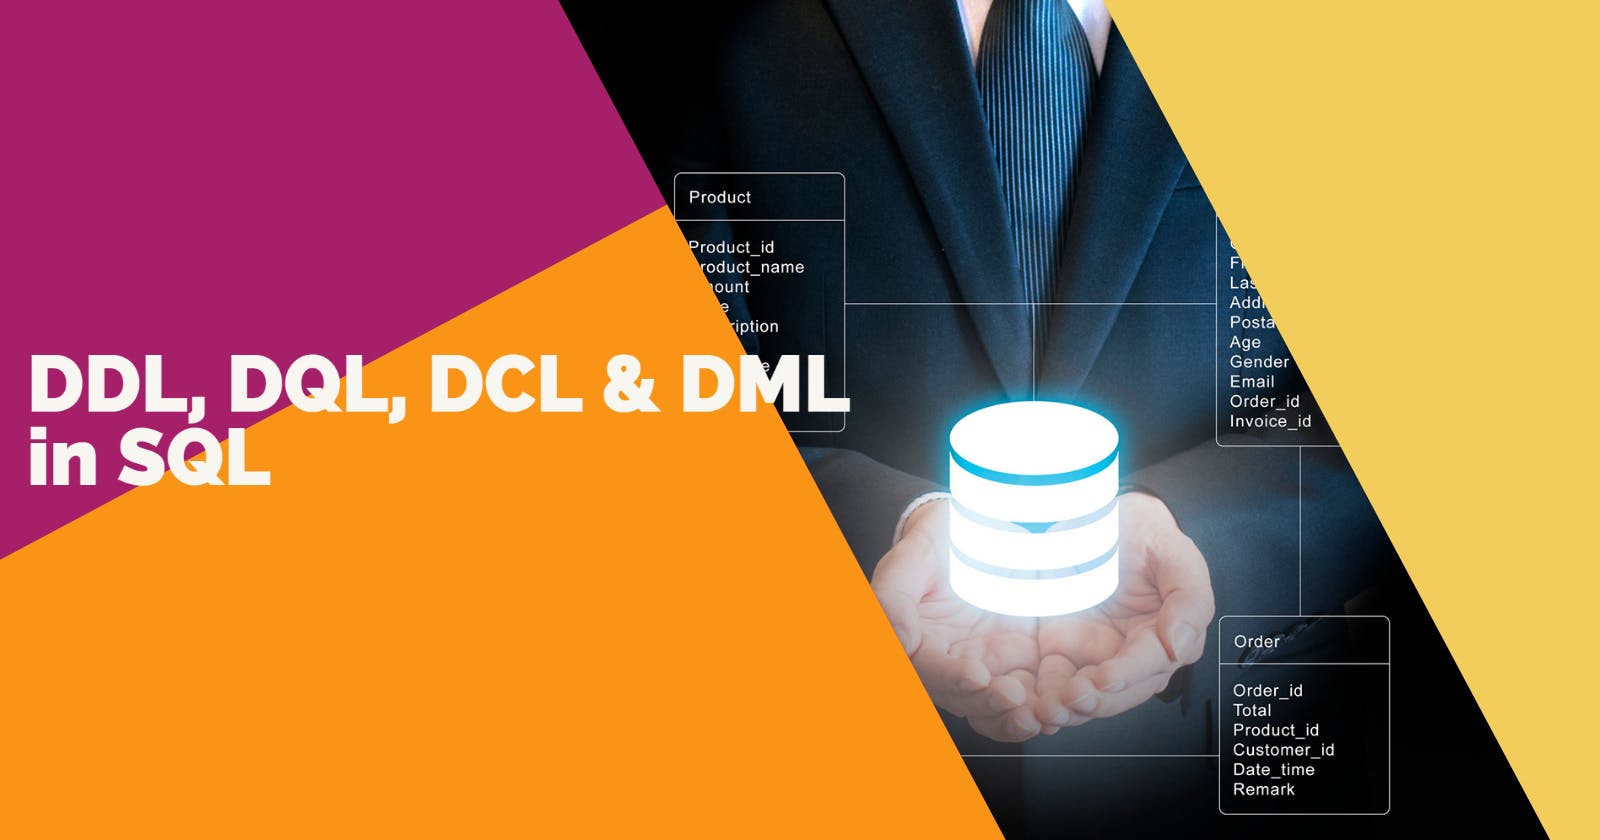 What is DDL, DML, DQL and DCL in SQL?